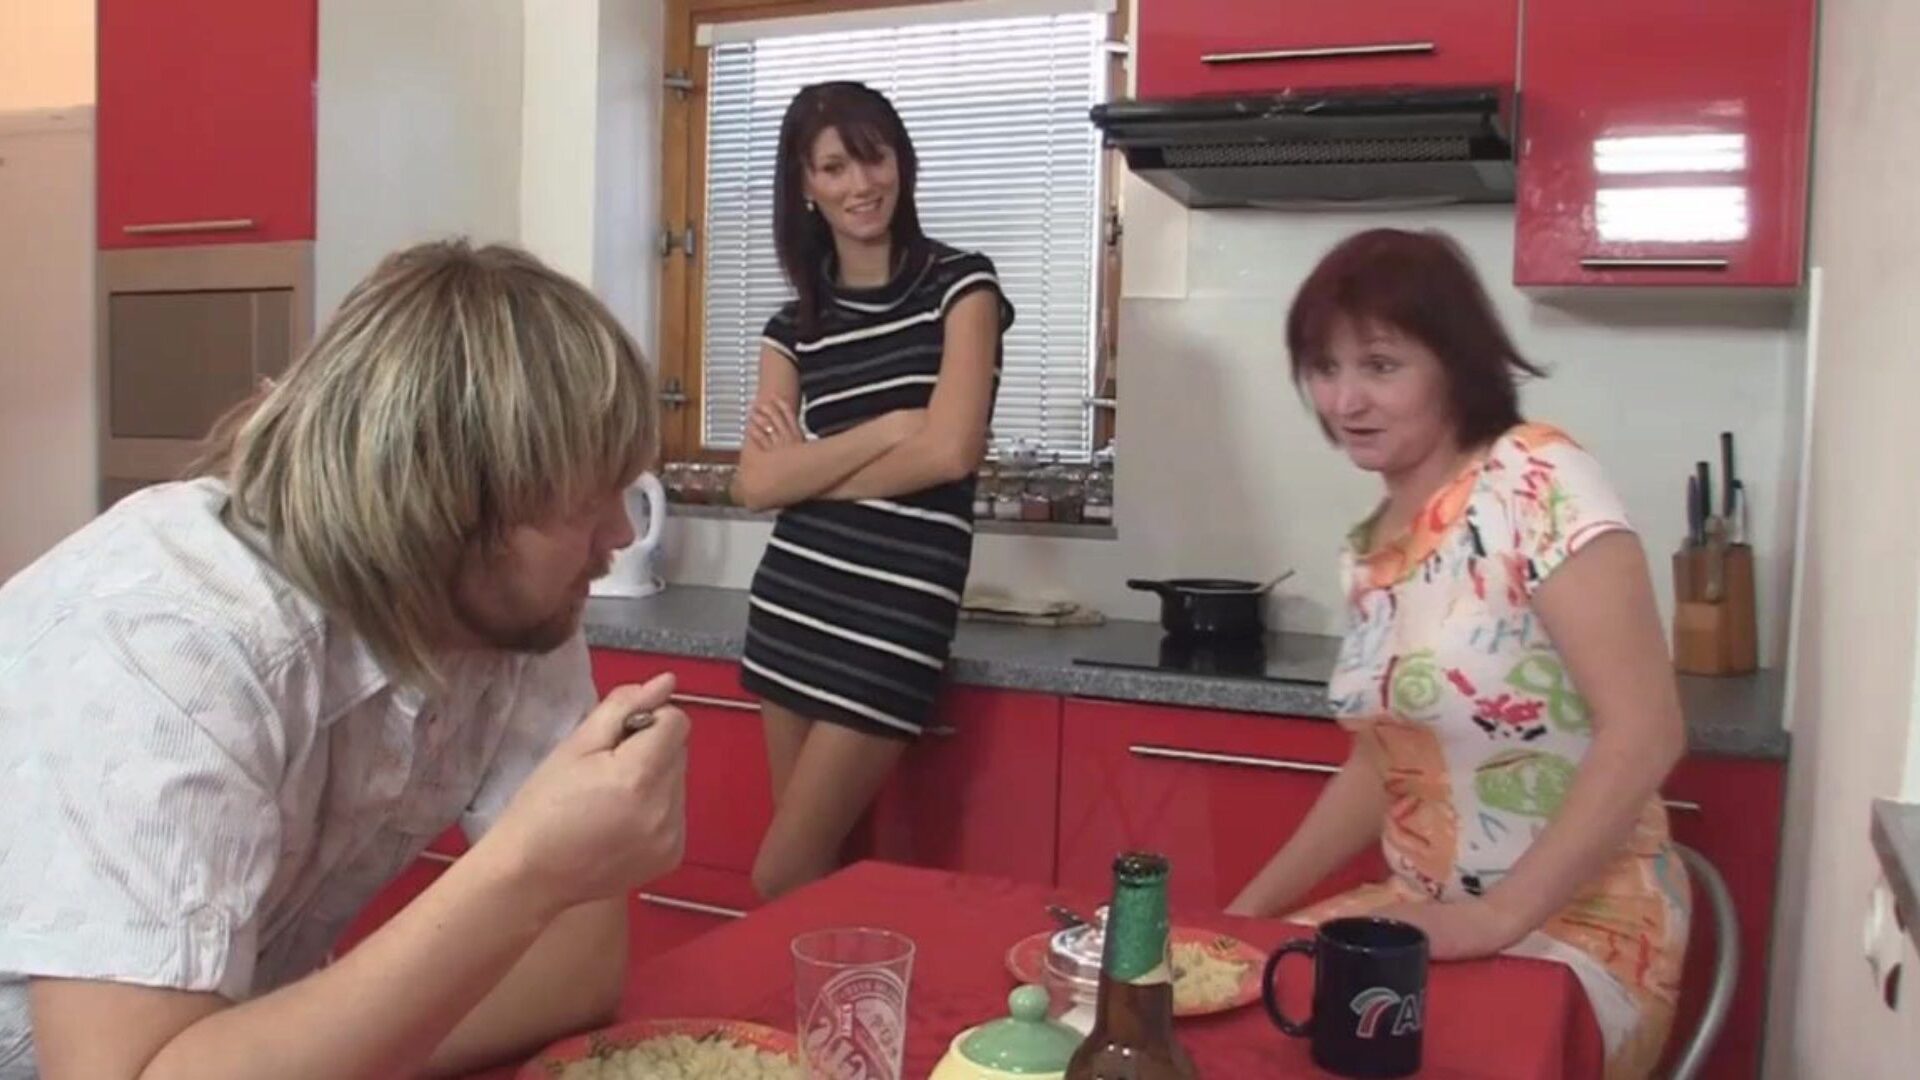 Dinner leads to family mature couple and legal age teenager romp